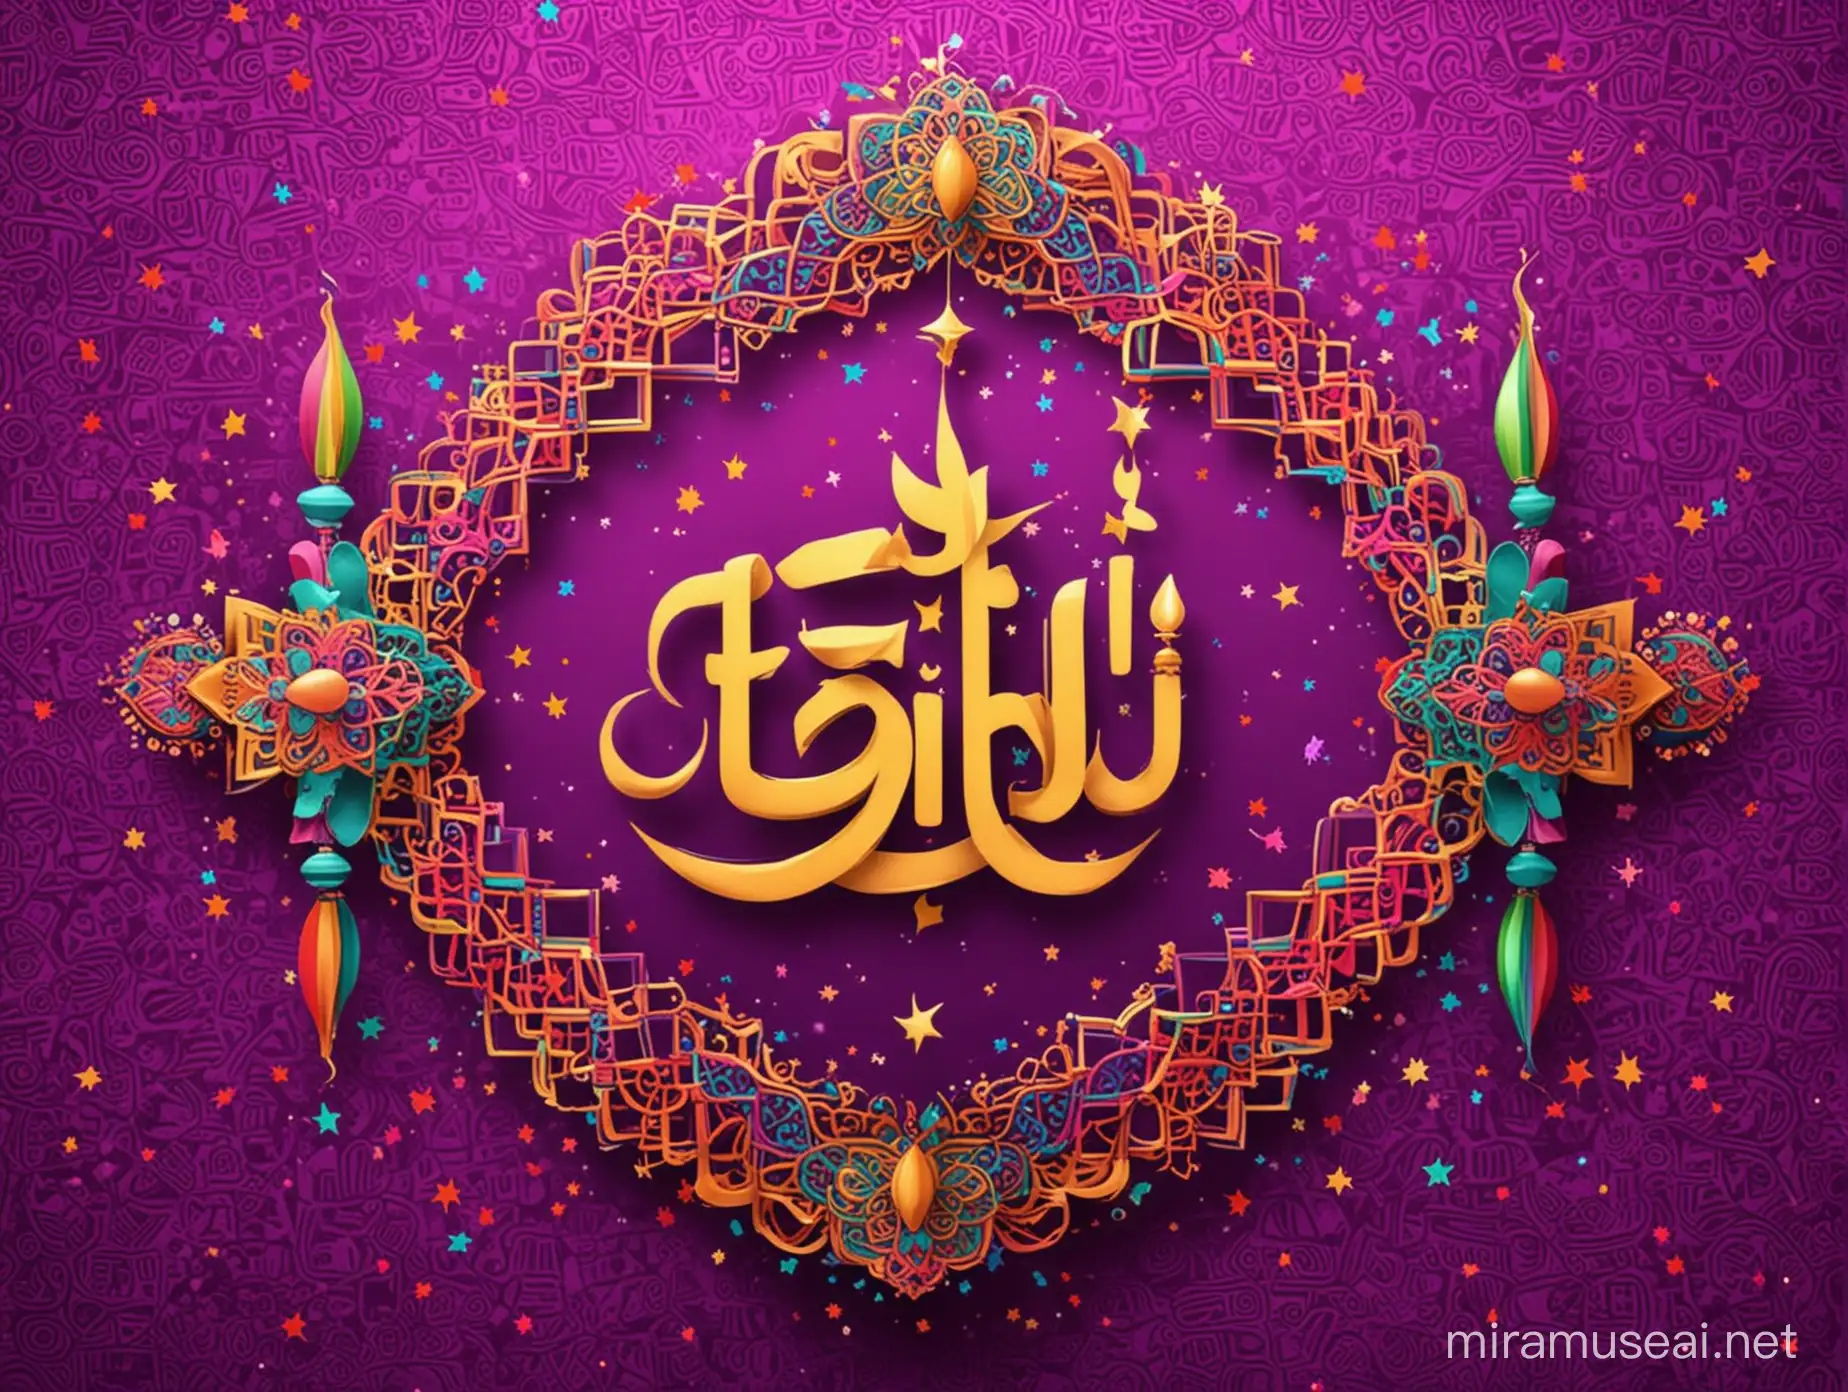 Create wallpaper about Eid Fitr, colorful